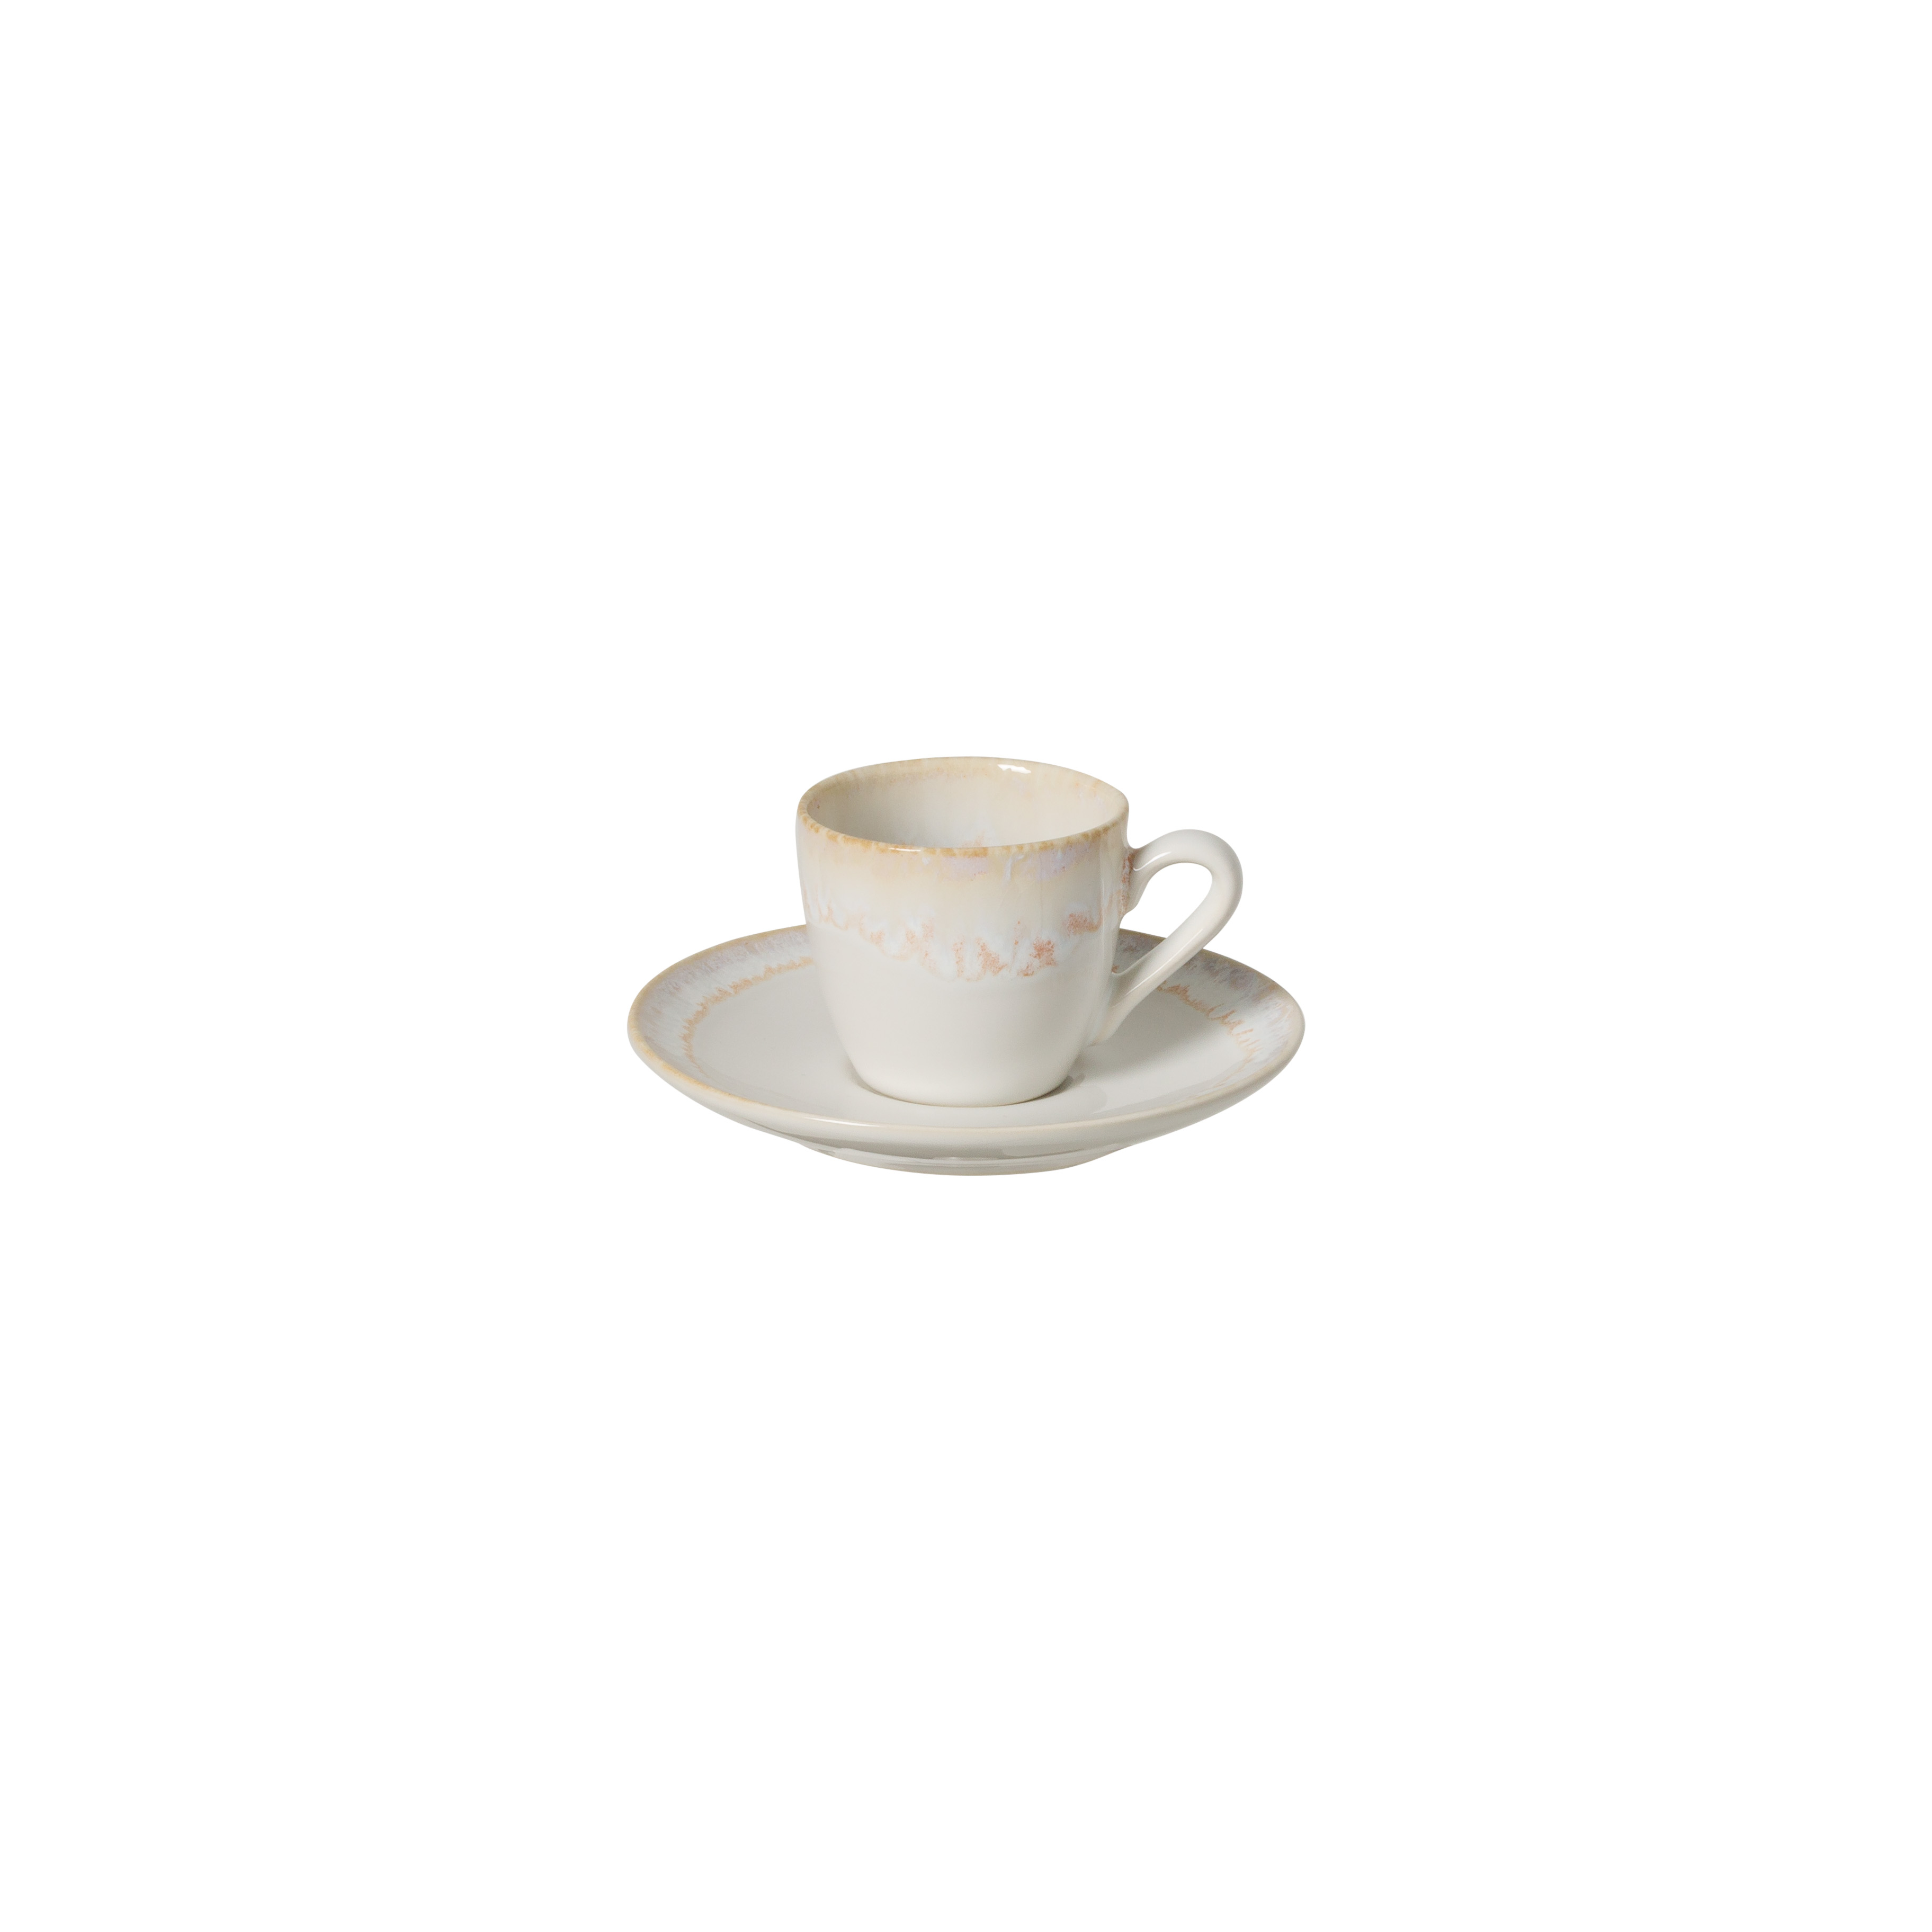 Taormina White Coffee Cup And Saucer 0.1l Gift